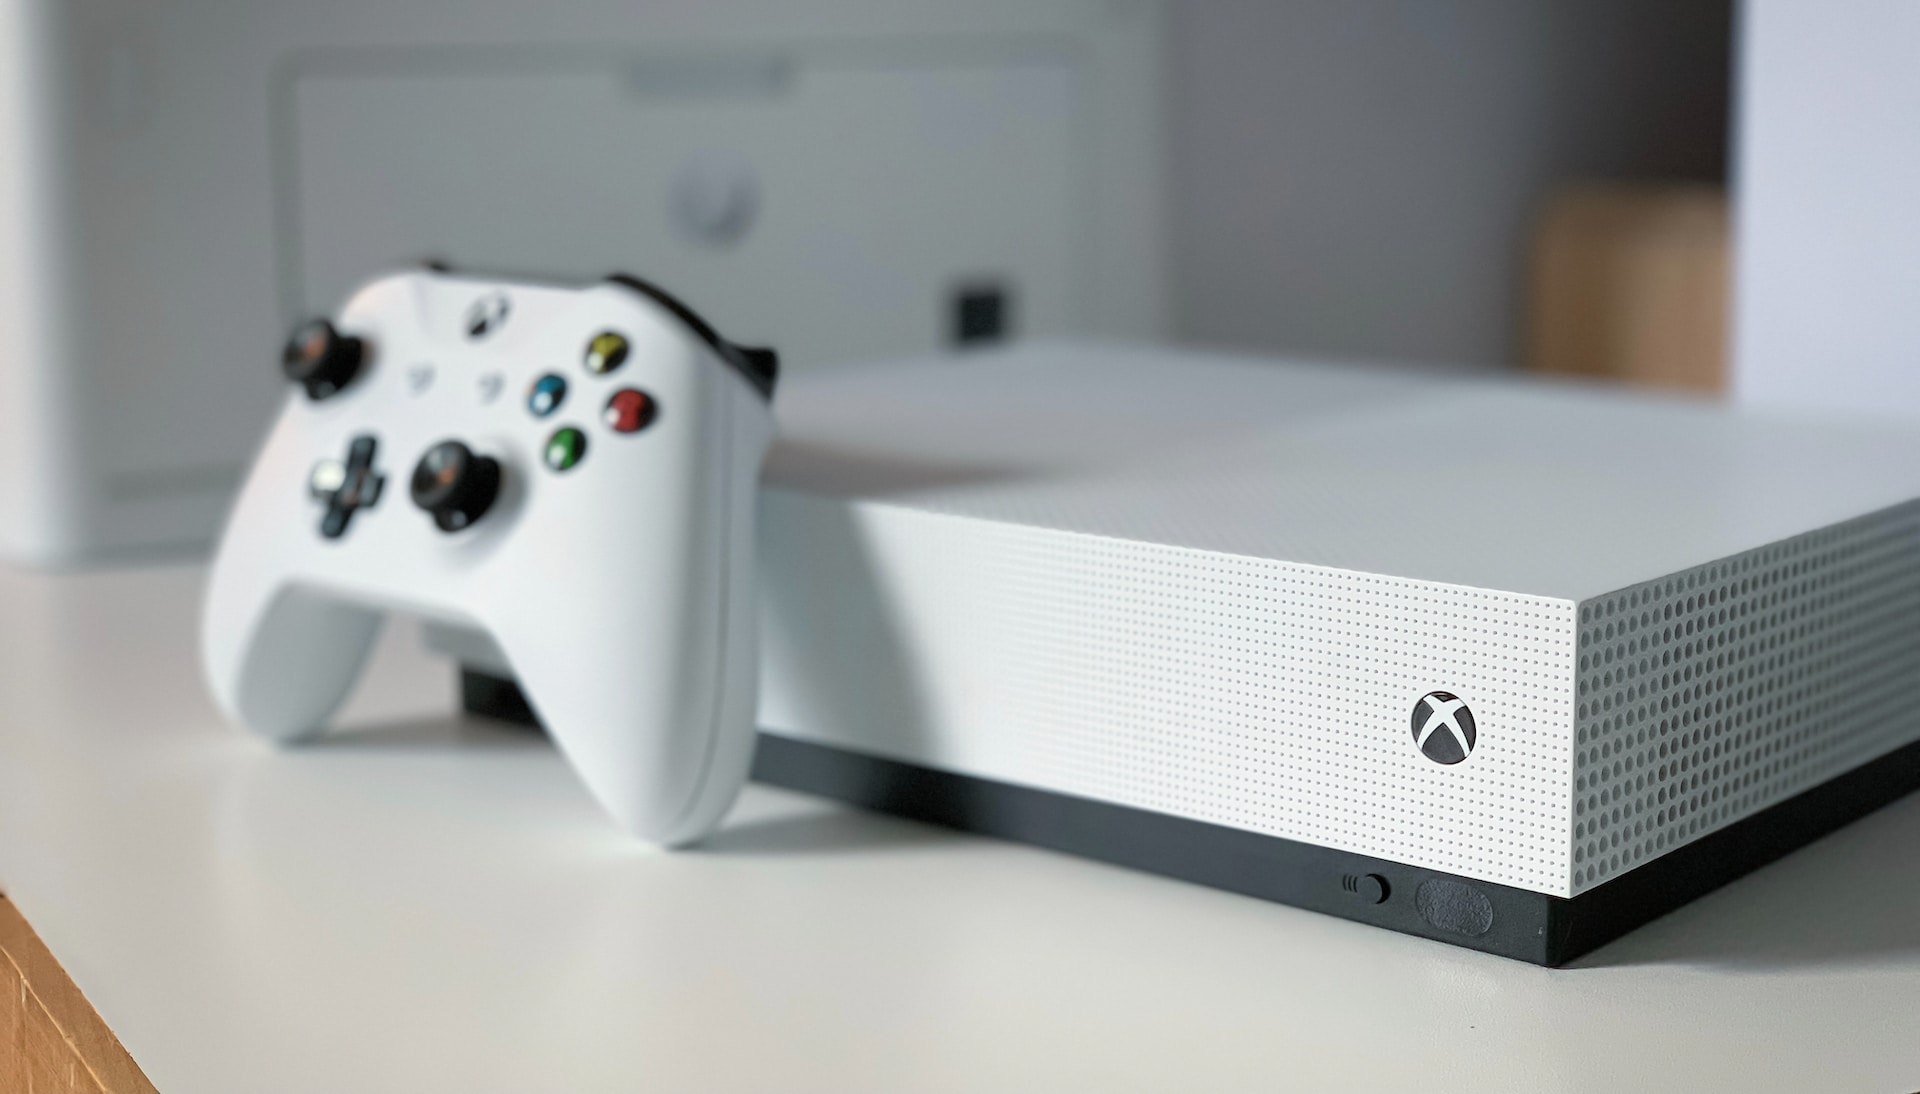 Communication Hacks: Talking On Xbox One Without A Headset